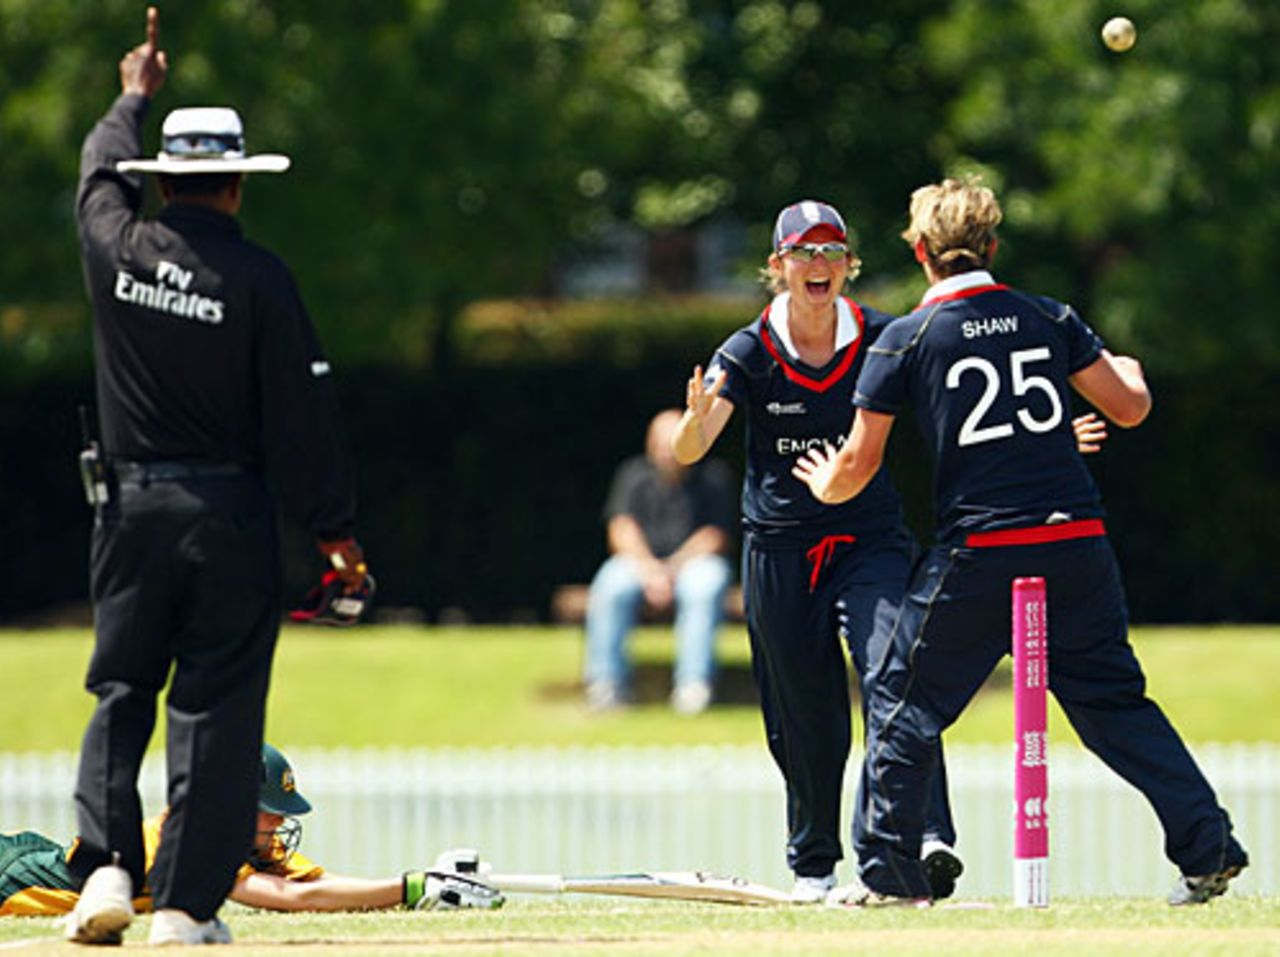 Charlotte Edwards and Nicky Shaw celebrate a wicket, Australia v England, women's World Cup warm-up, Sydney, March 2, 2009